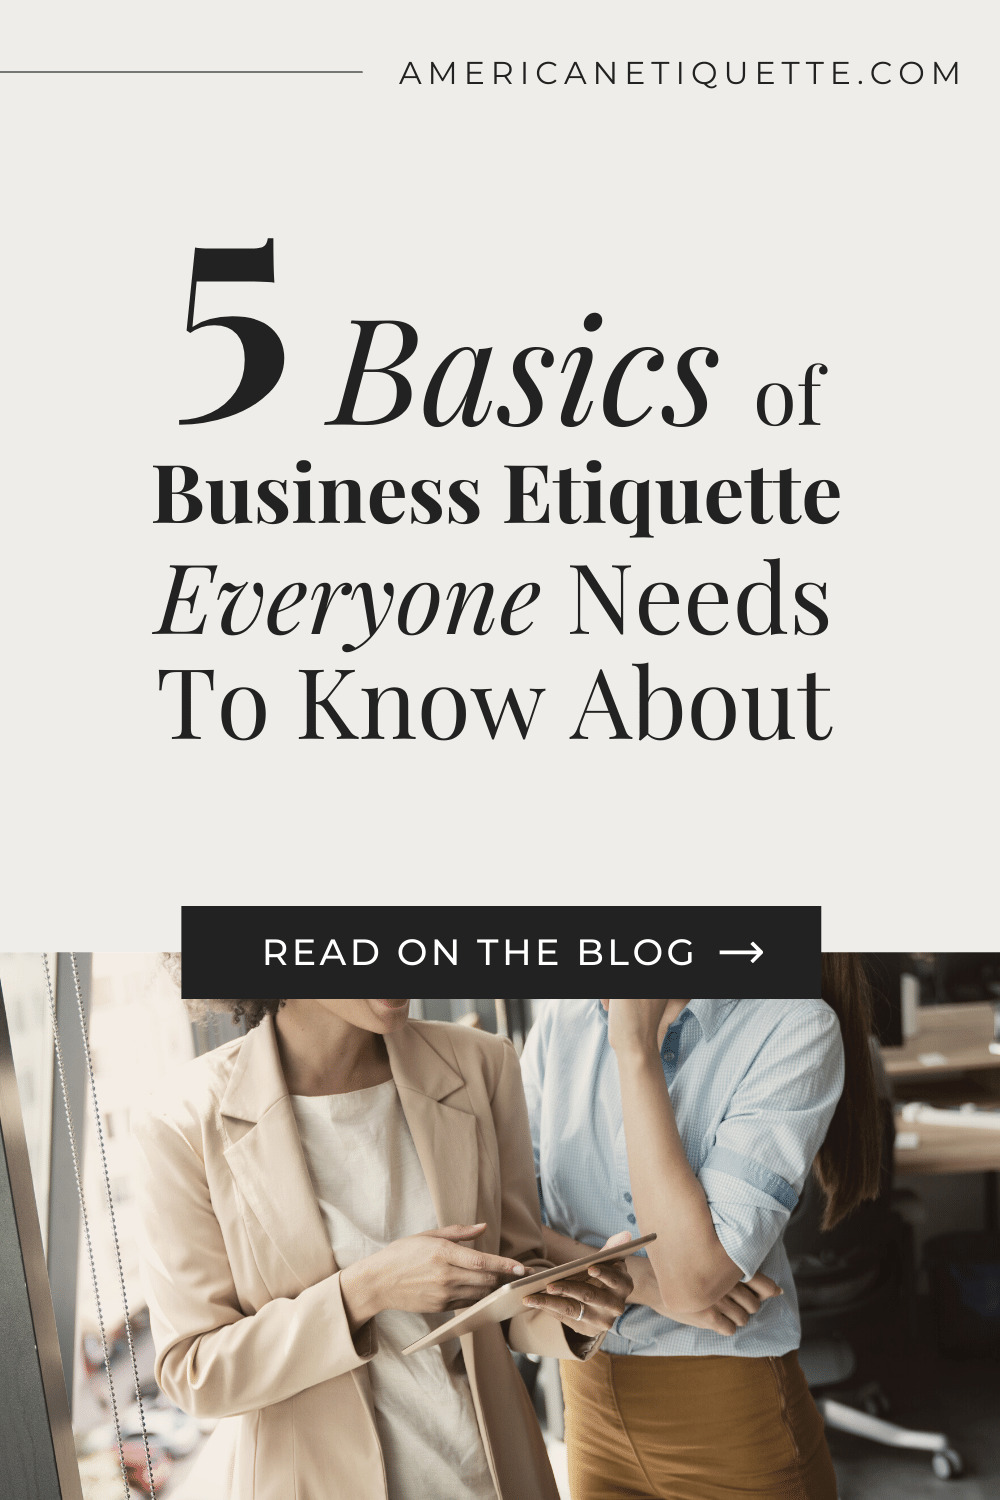 5 Basics of Business Etiquette Everyone Needs To Know About | American Etiquette